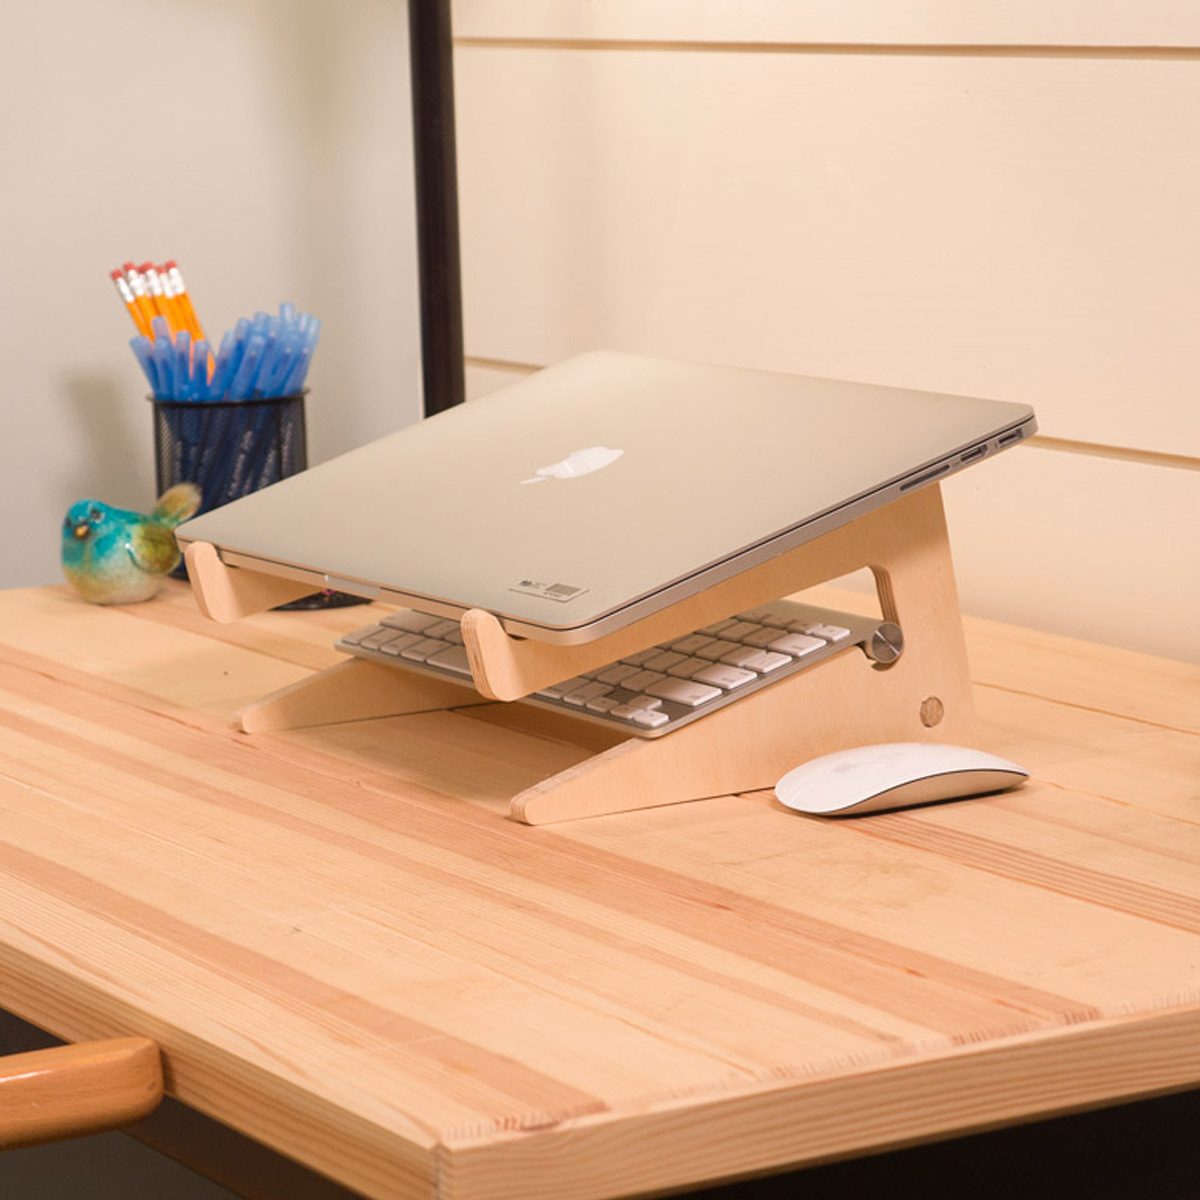 Laptop Computer Stand